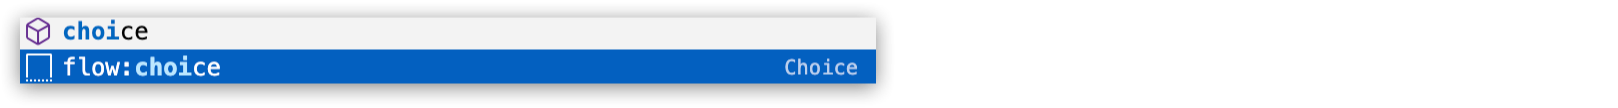 Auto-completion options for the Choice router